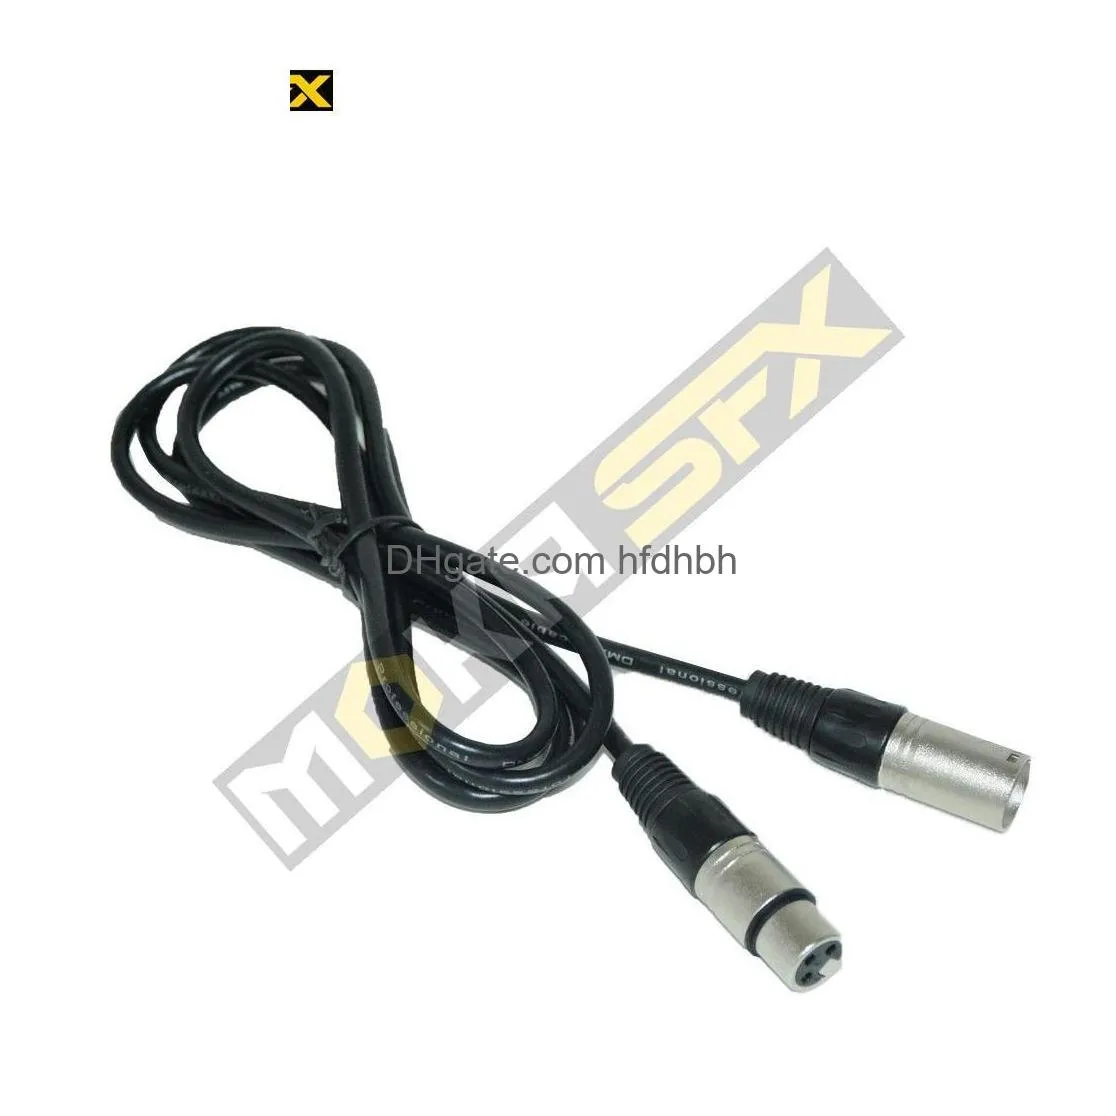  10 pcs/lot 2 meter length 3 pin signal connection dmx cable high speed metal material for stage/ddj/party